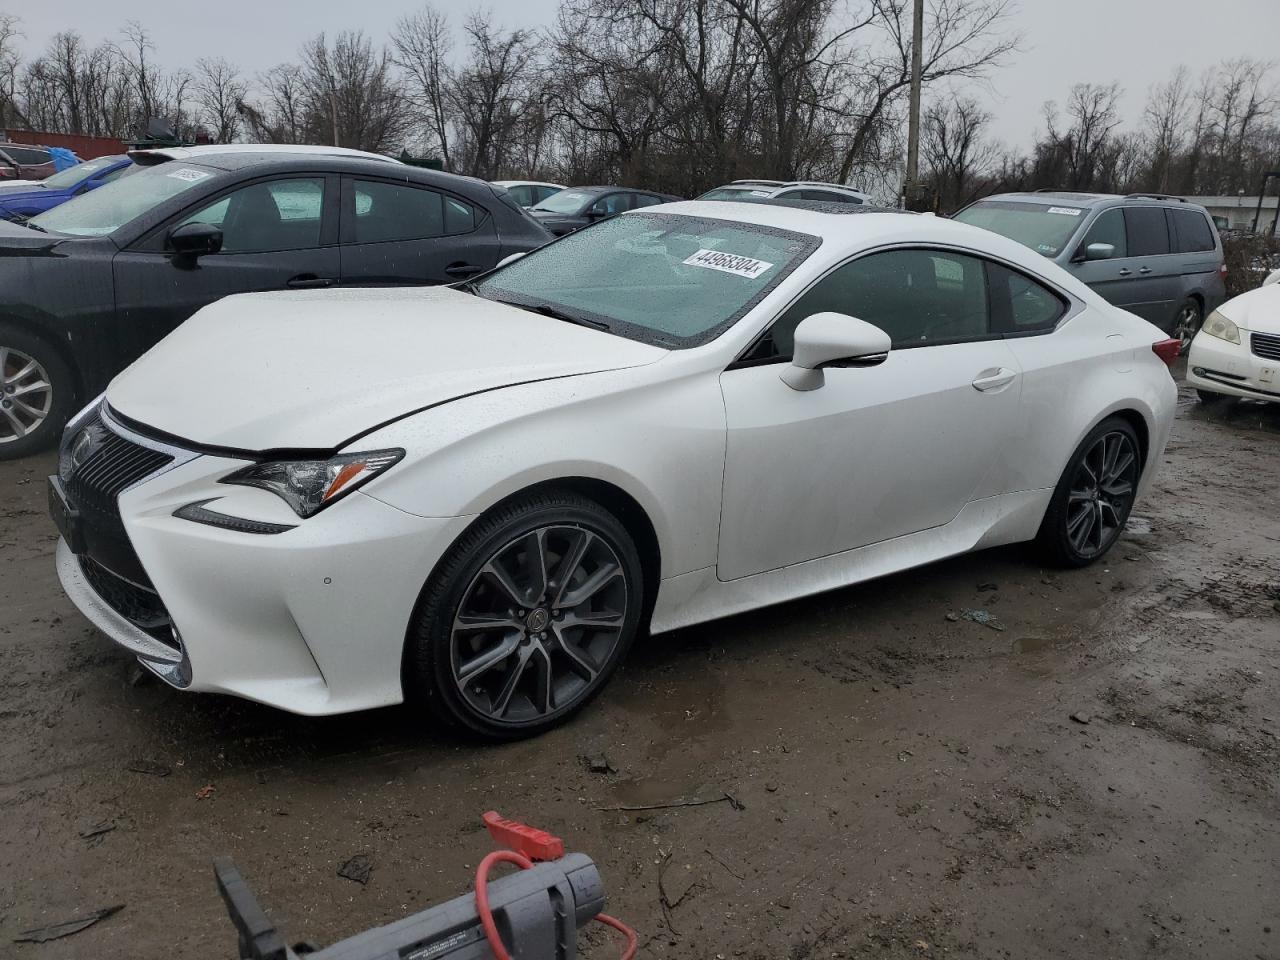 vin: JTHSM5BC3H5002484 JTHSM5BC3H5002484 2017 lexus rc 3500 for Sale in 21225, Md - Baltimore East, Baltimore, USA